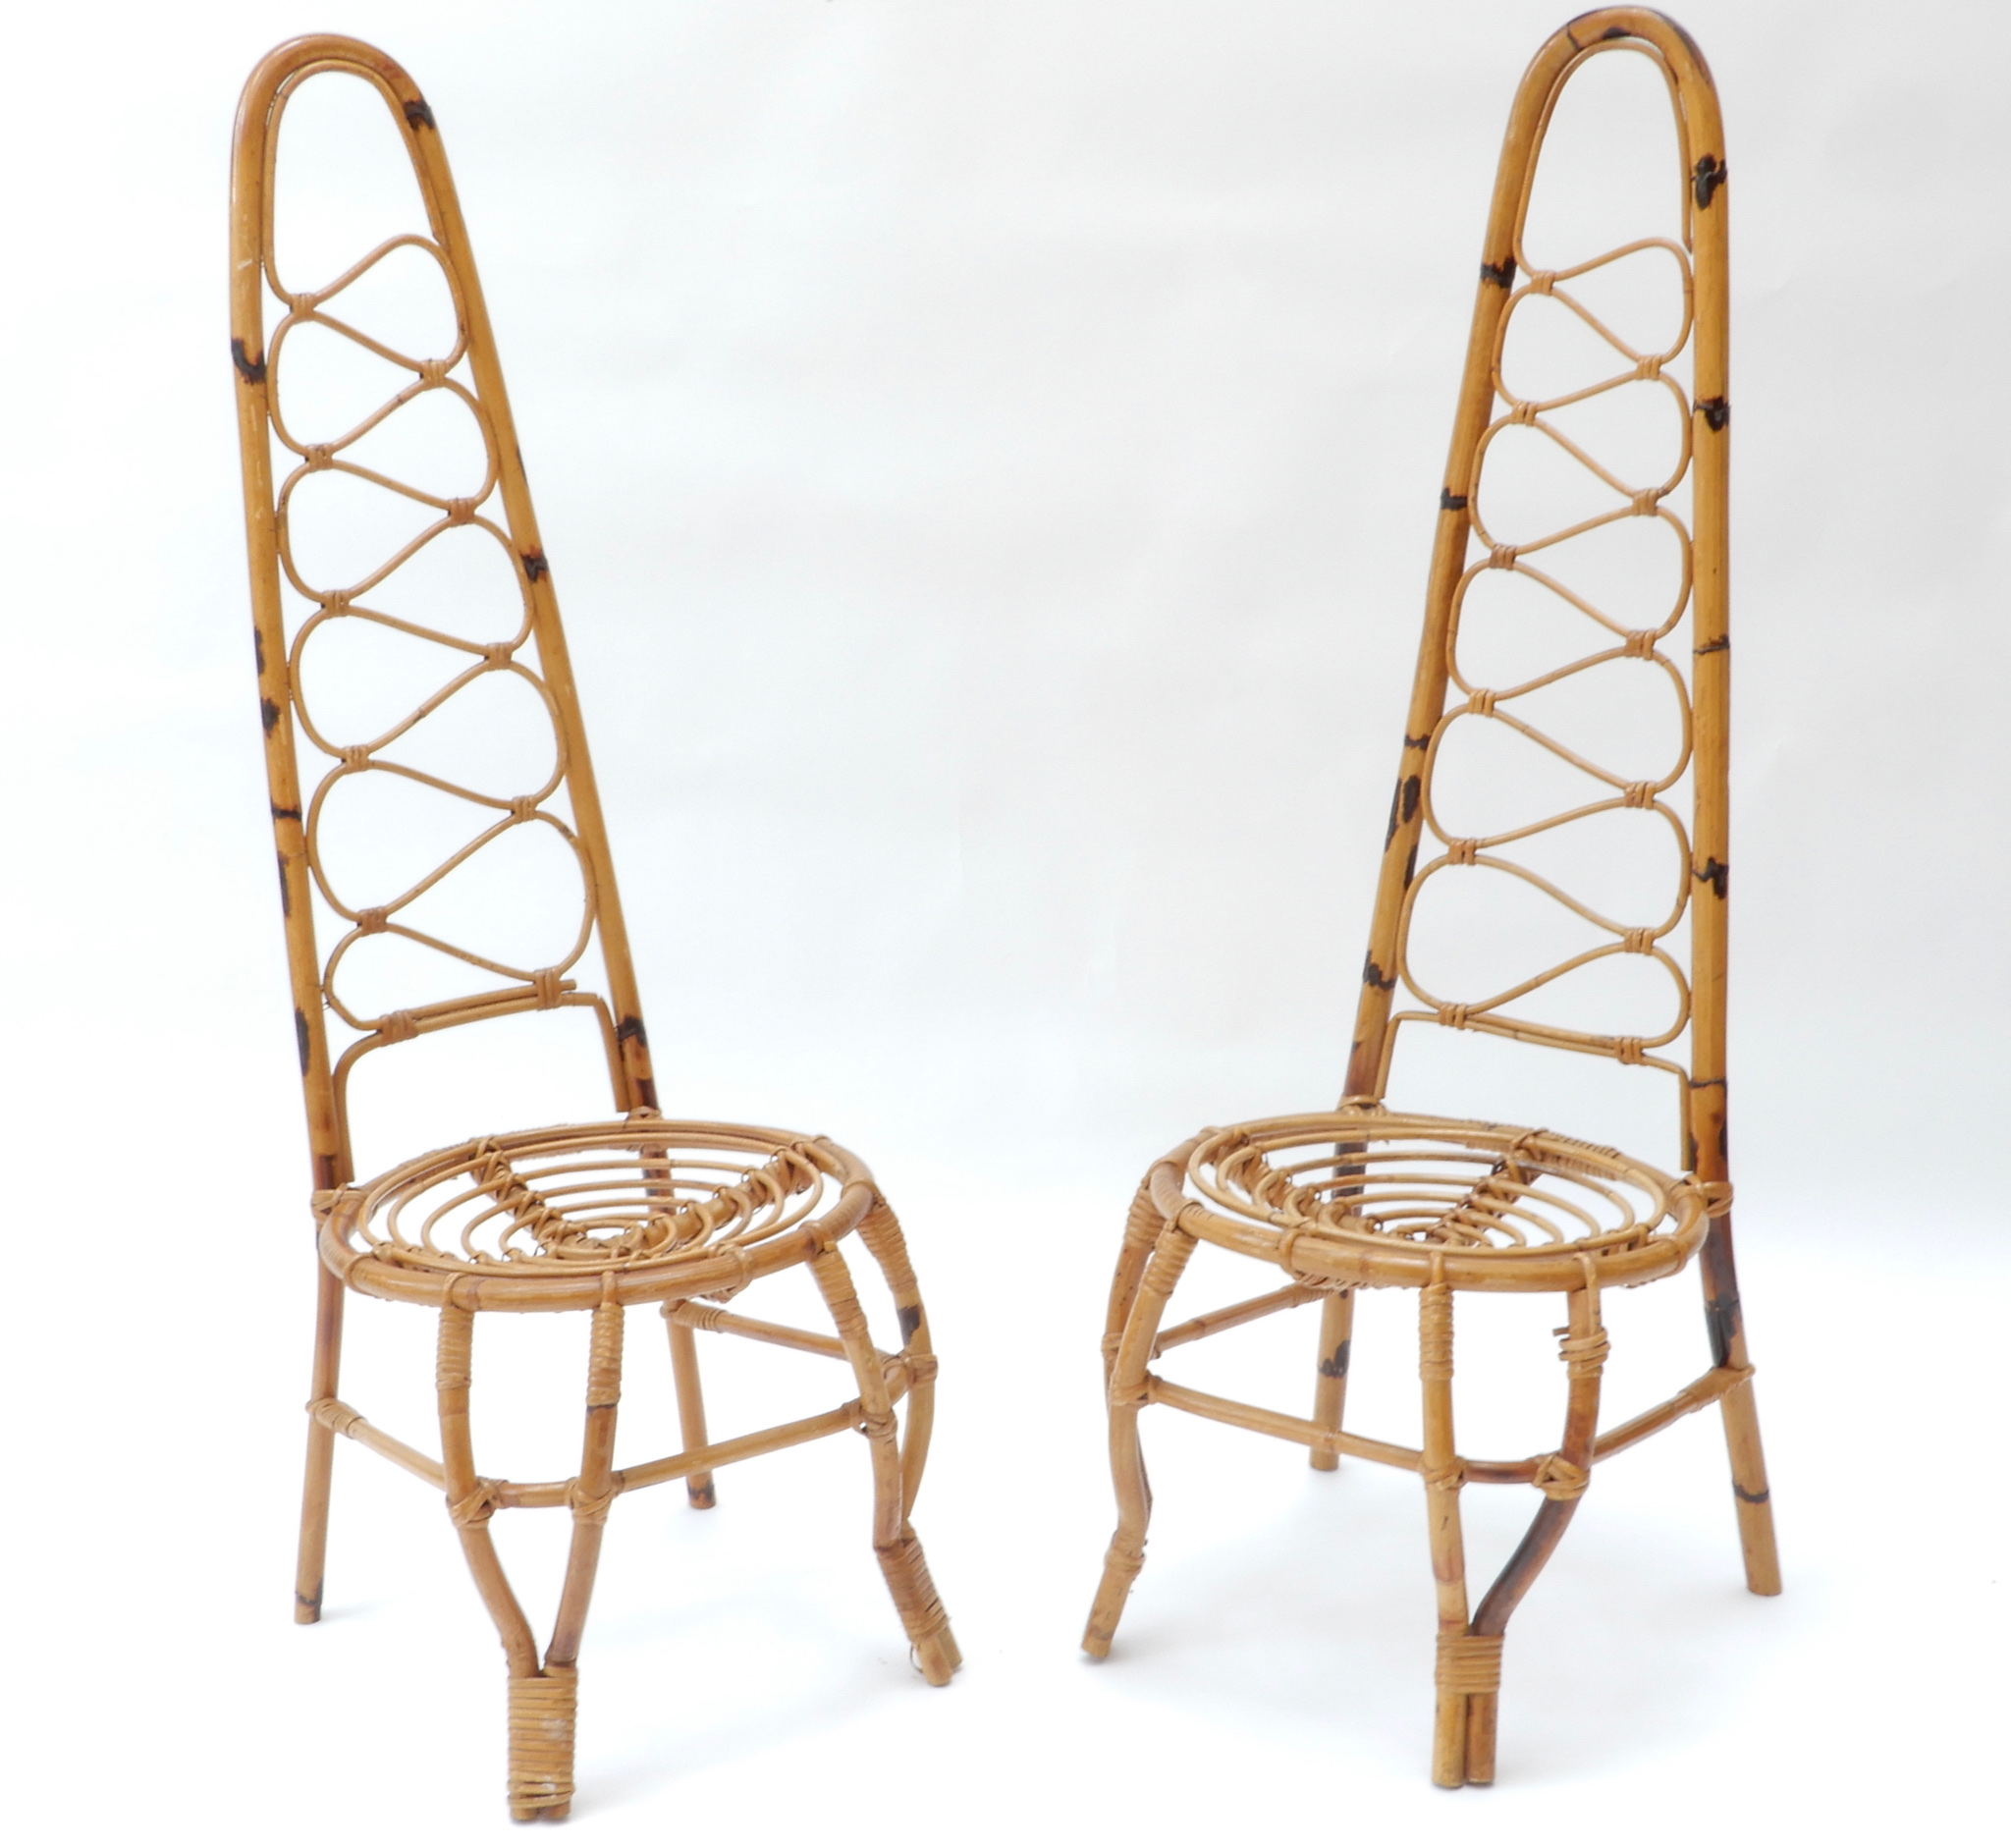 Sold - Rattan and Bamboo Chairs